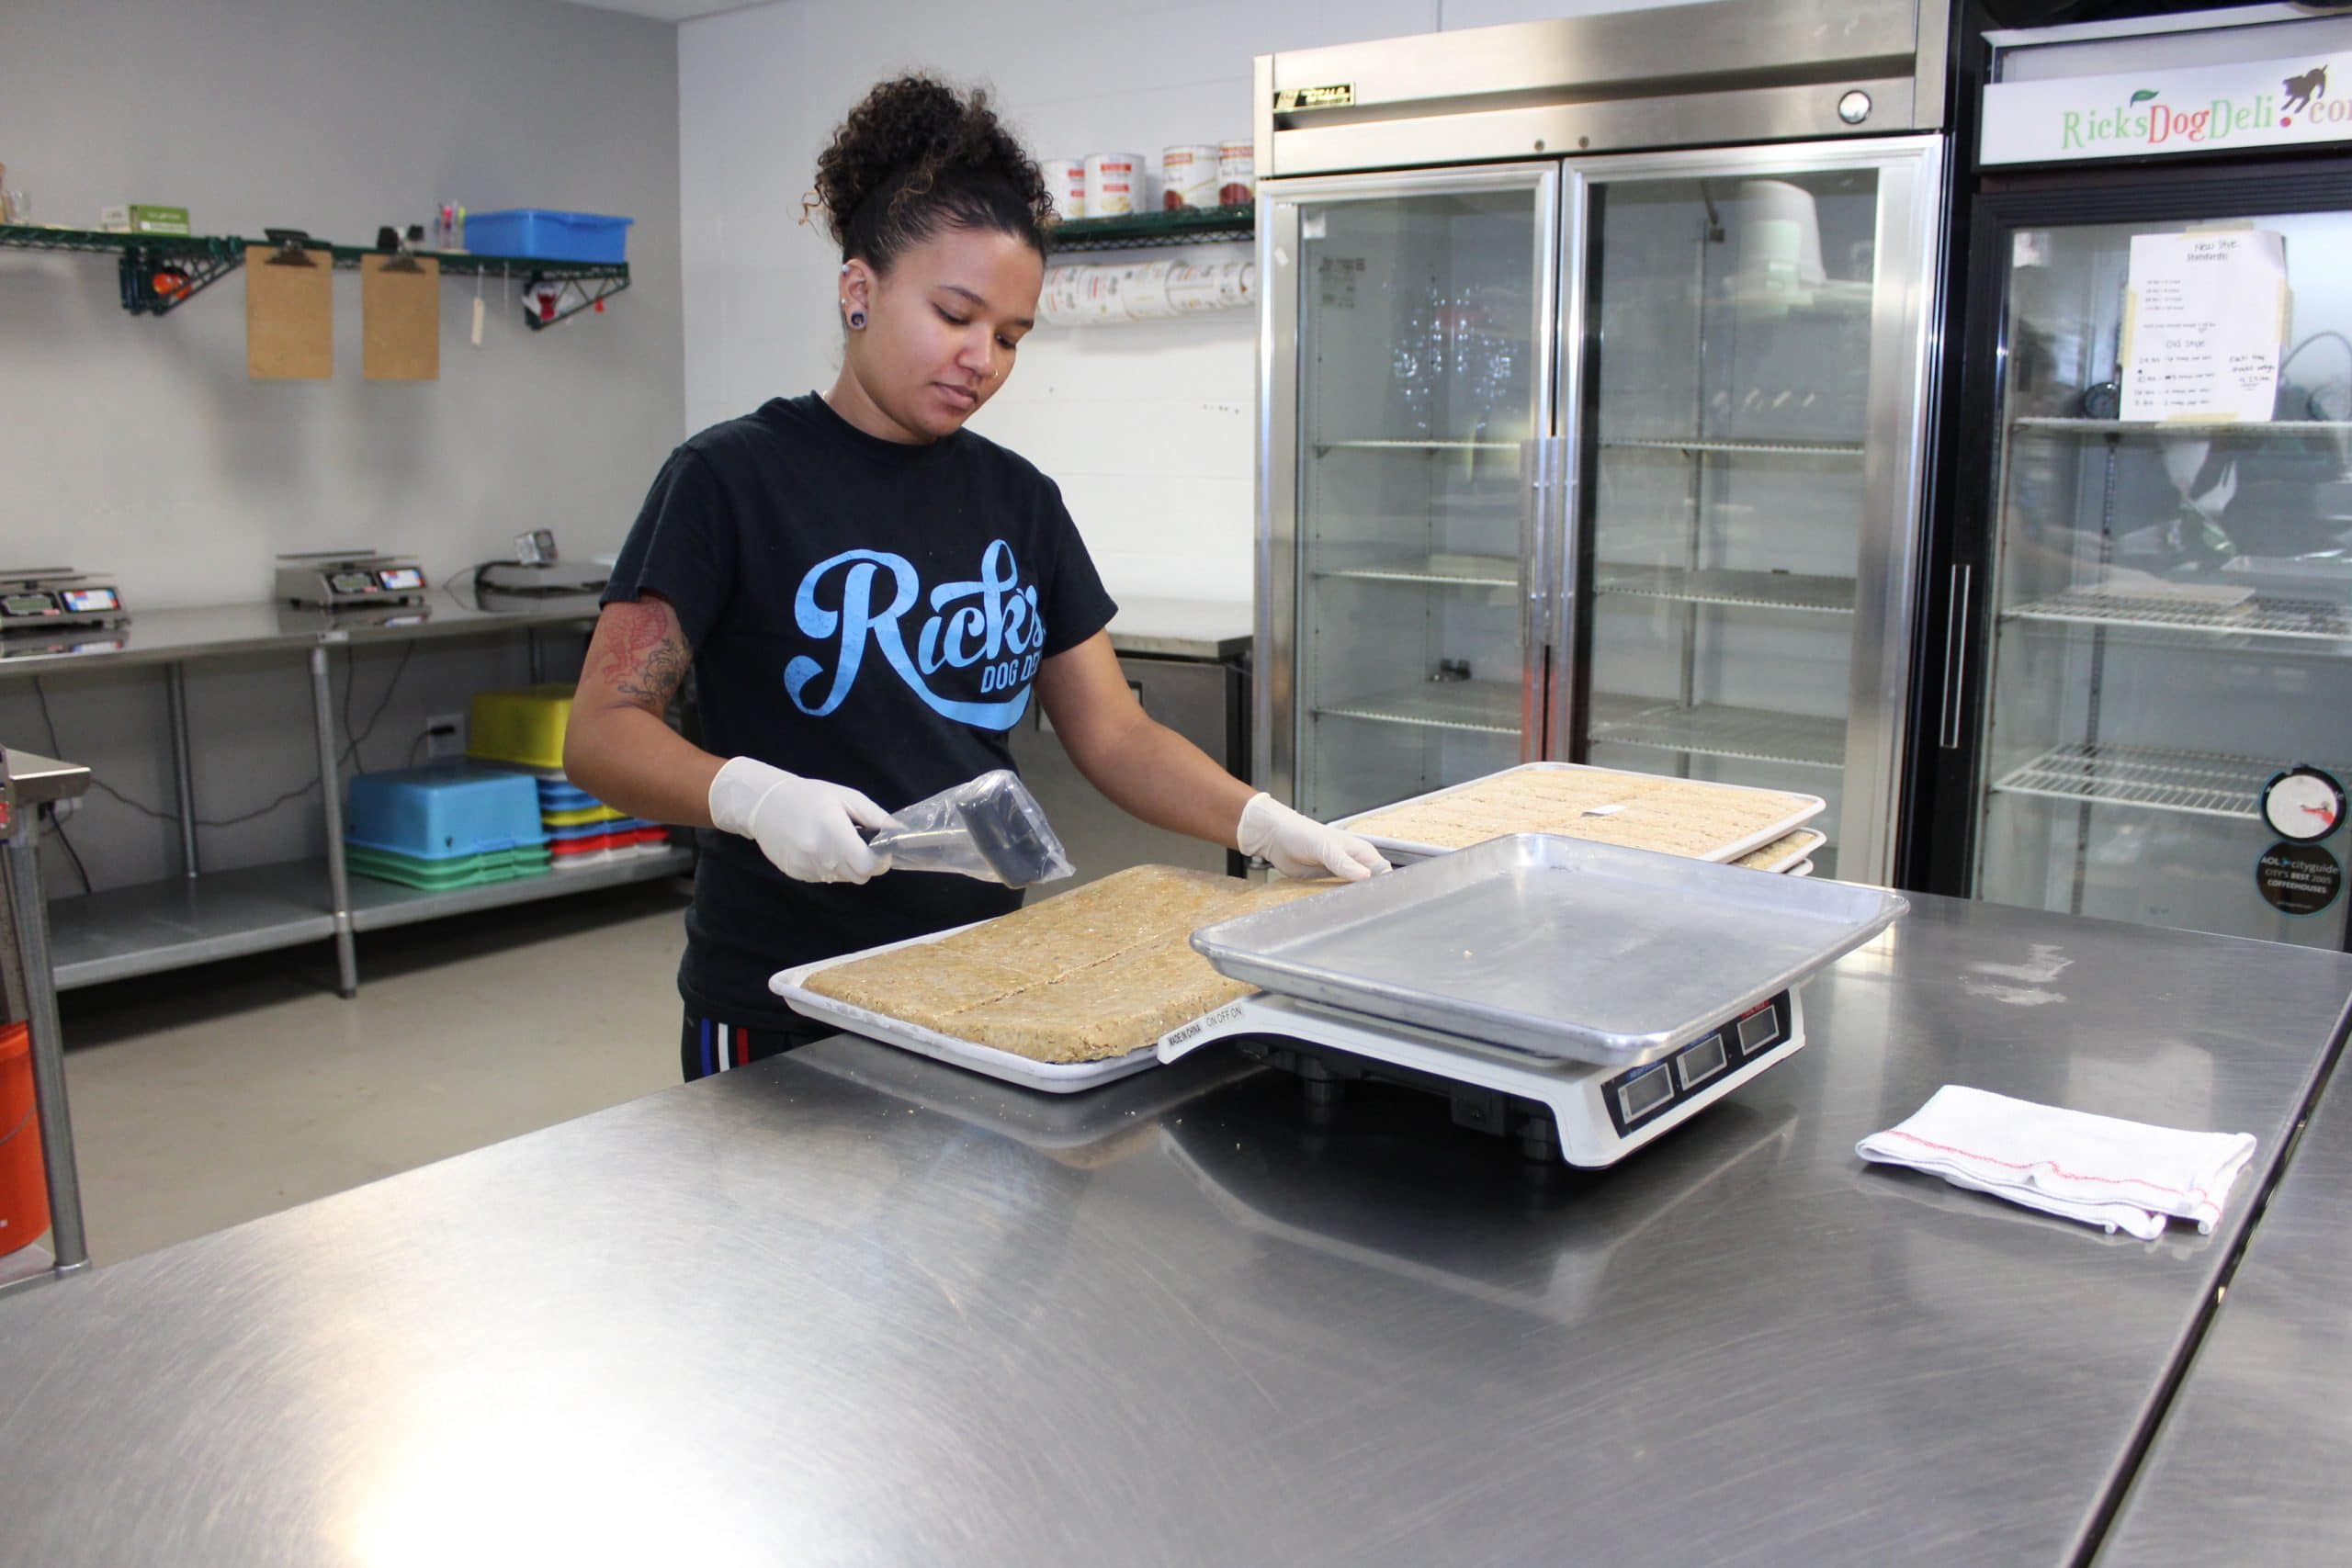 A Rick's Dog Deli employee making our fresh Orlando dog food in the kitchen.